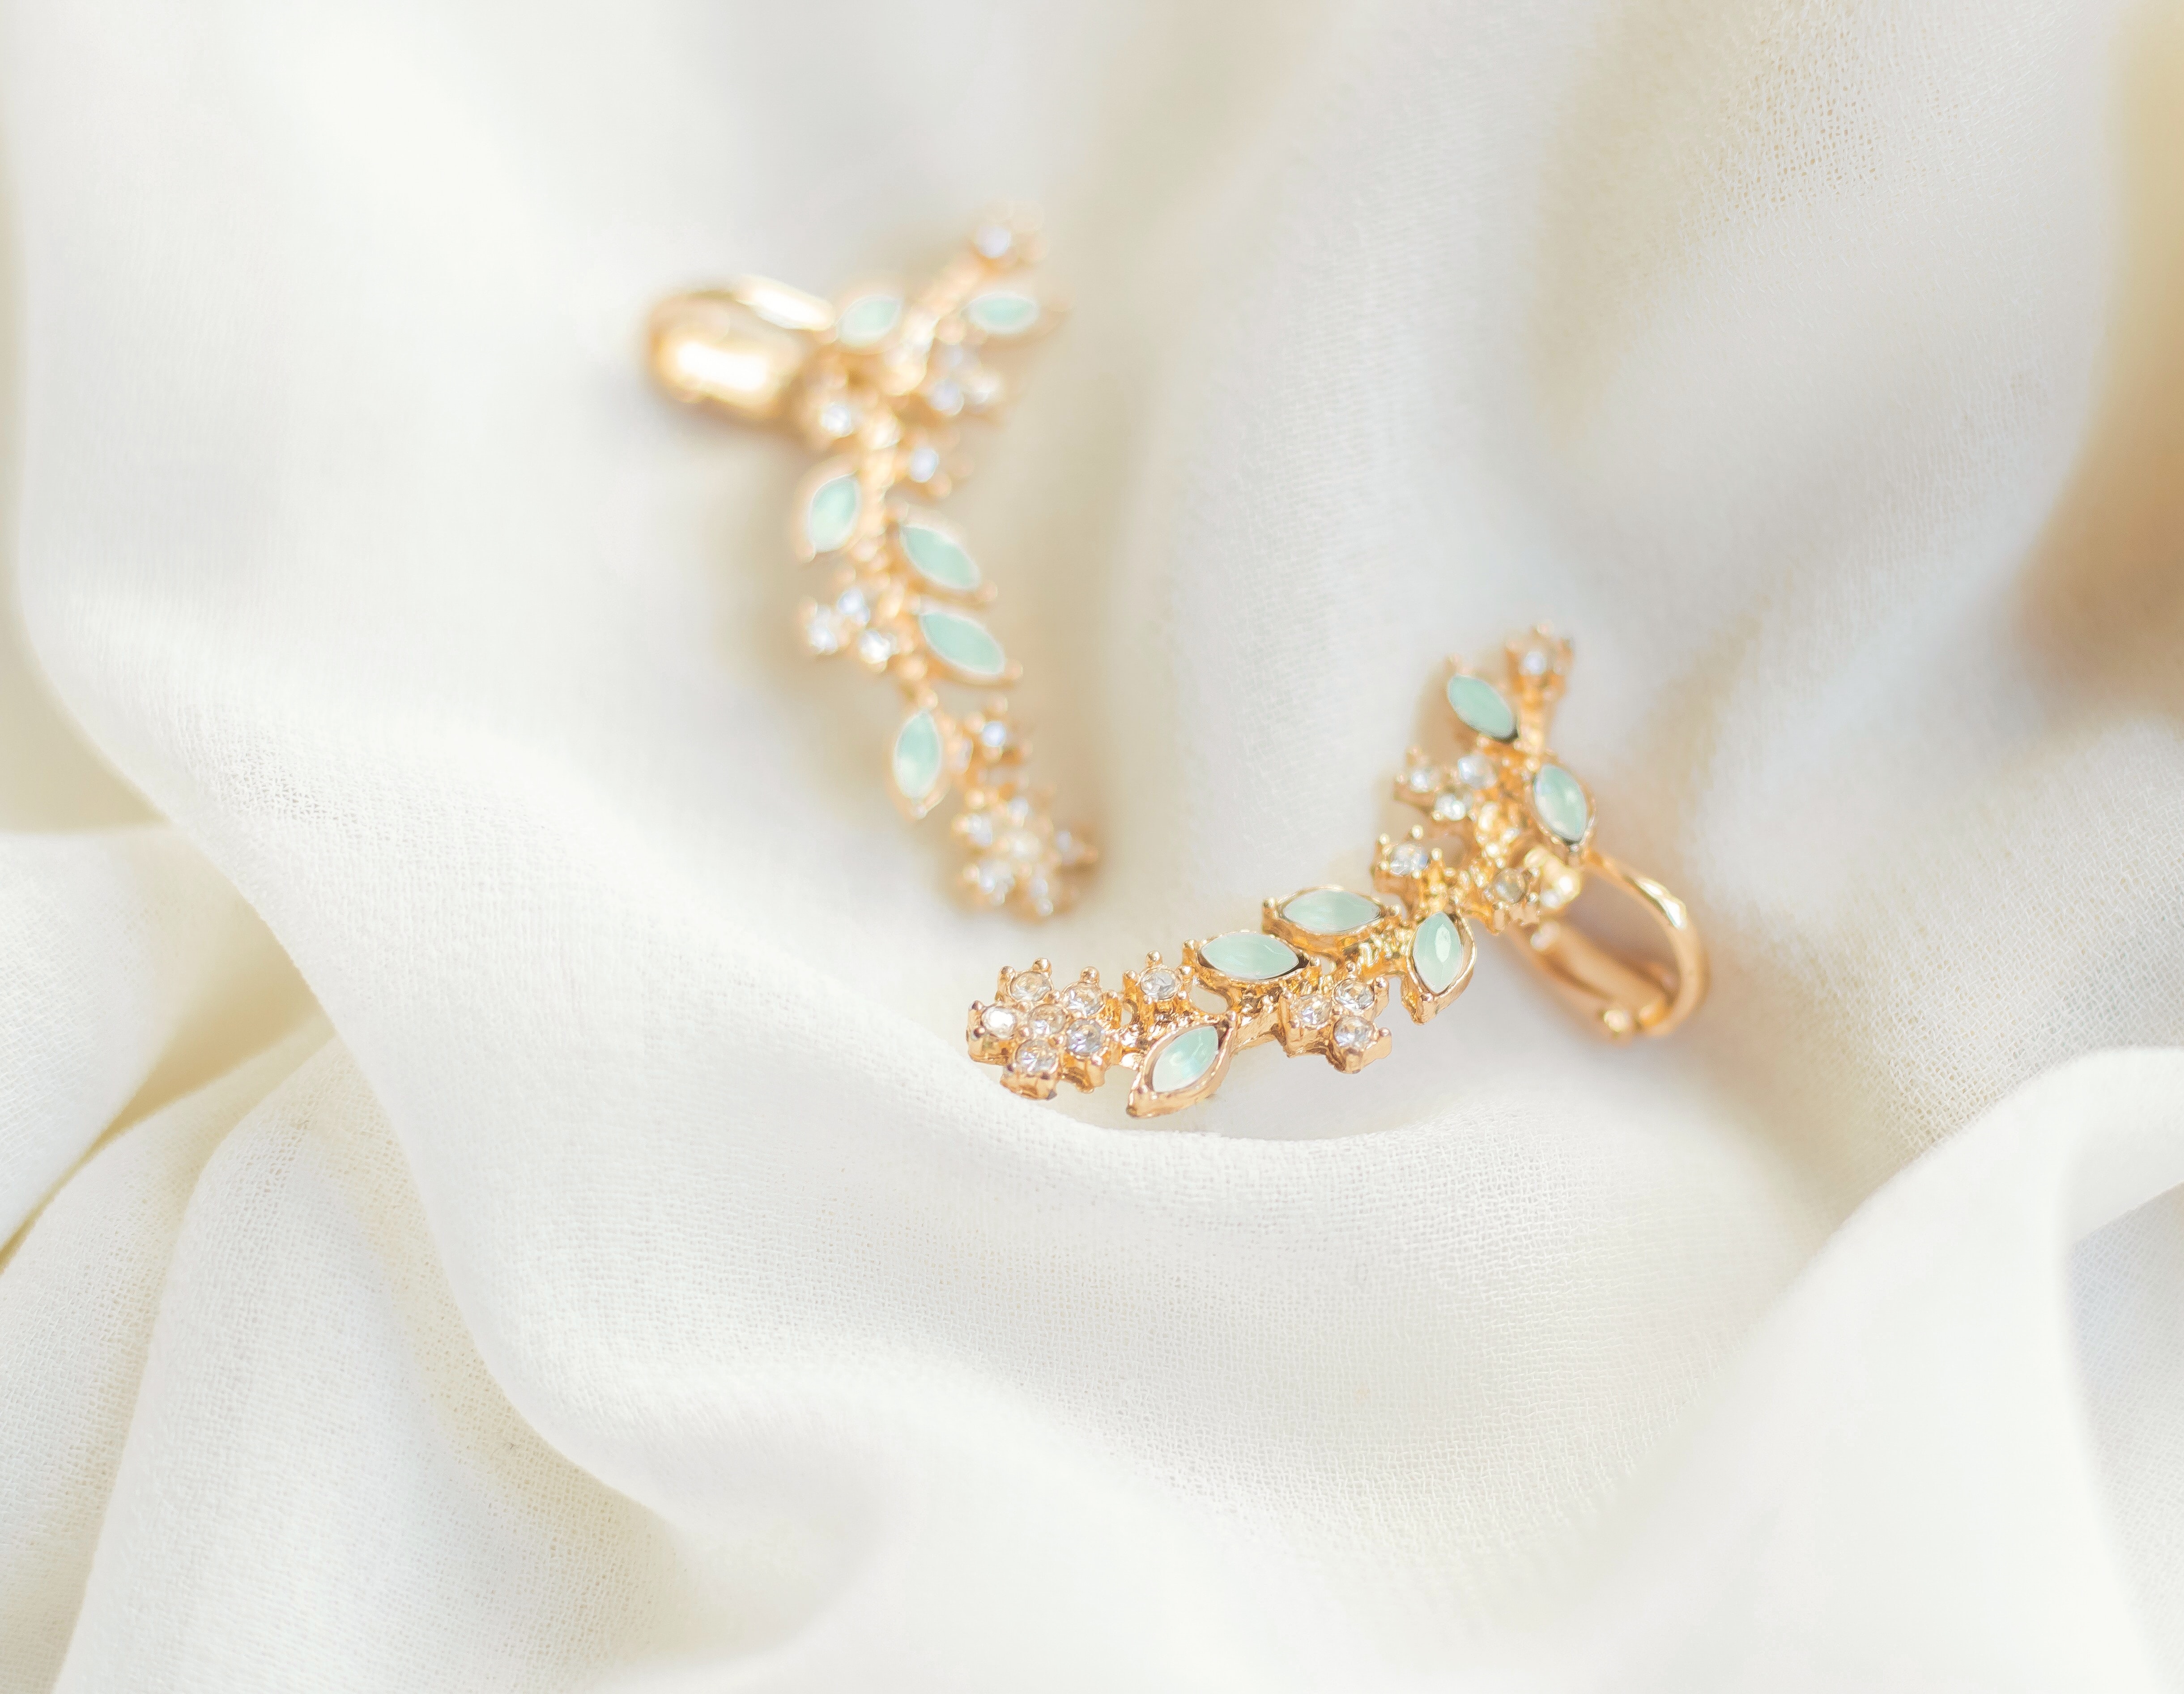 Jewelry Photography: How to Take Pictures of Jewelry